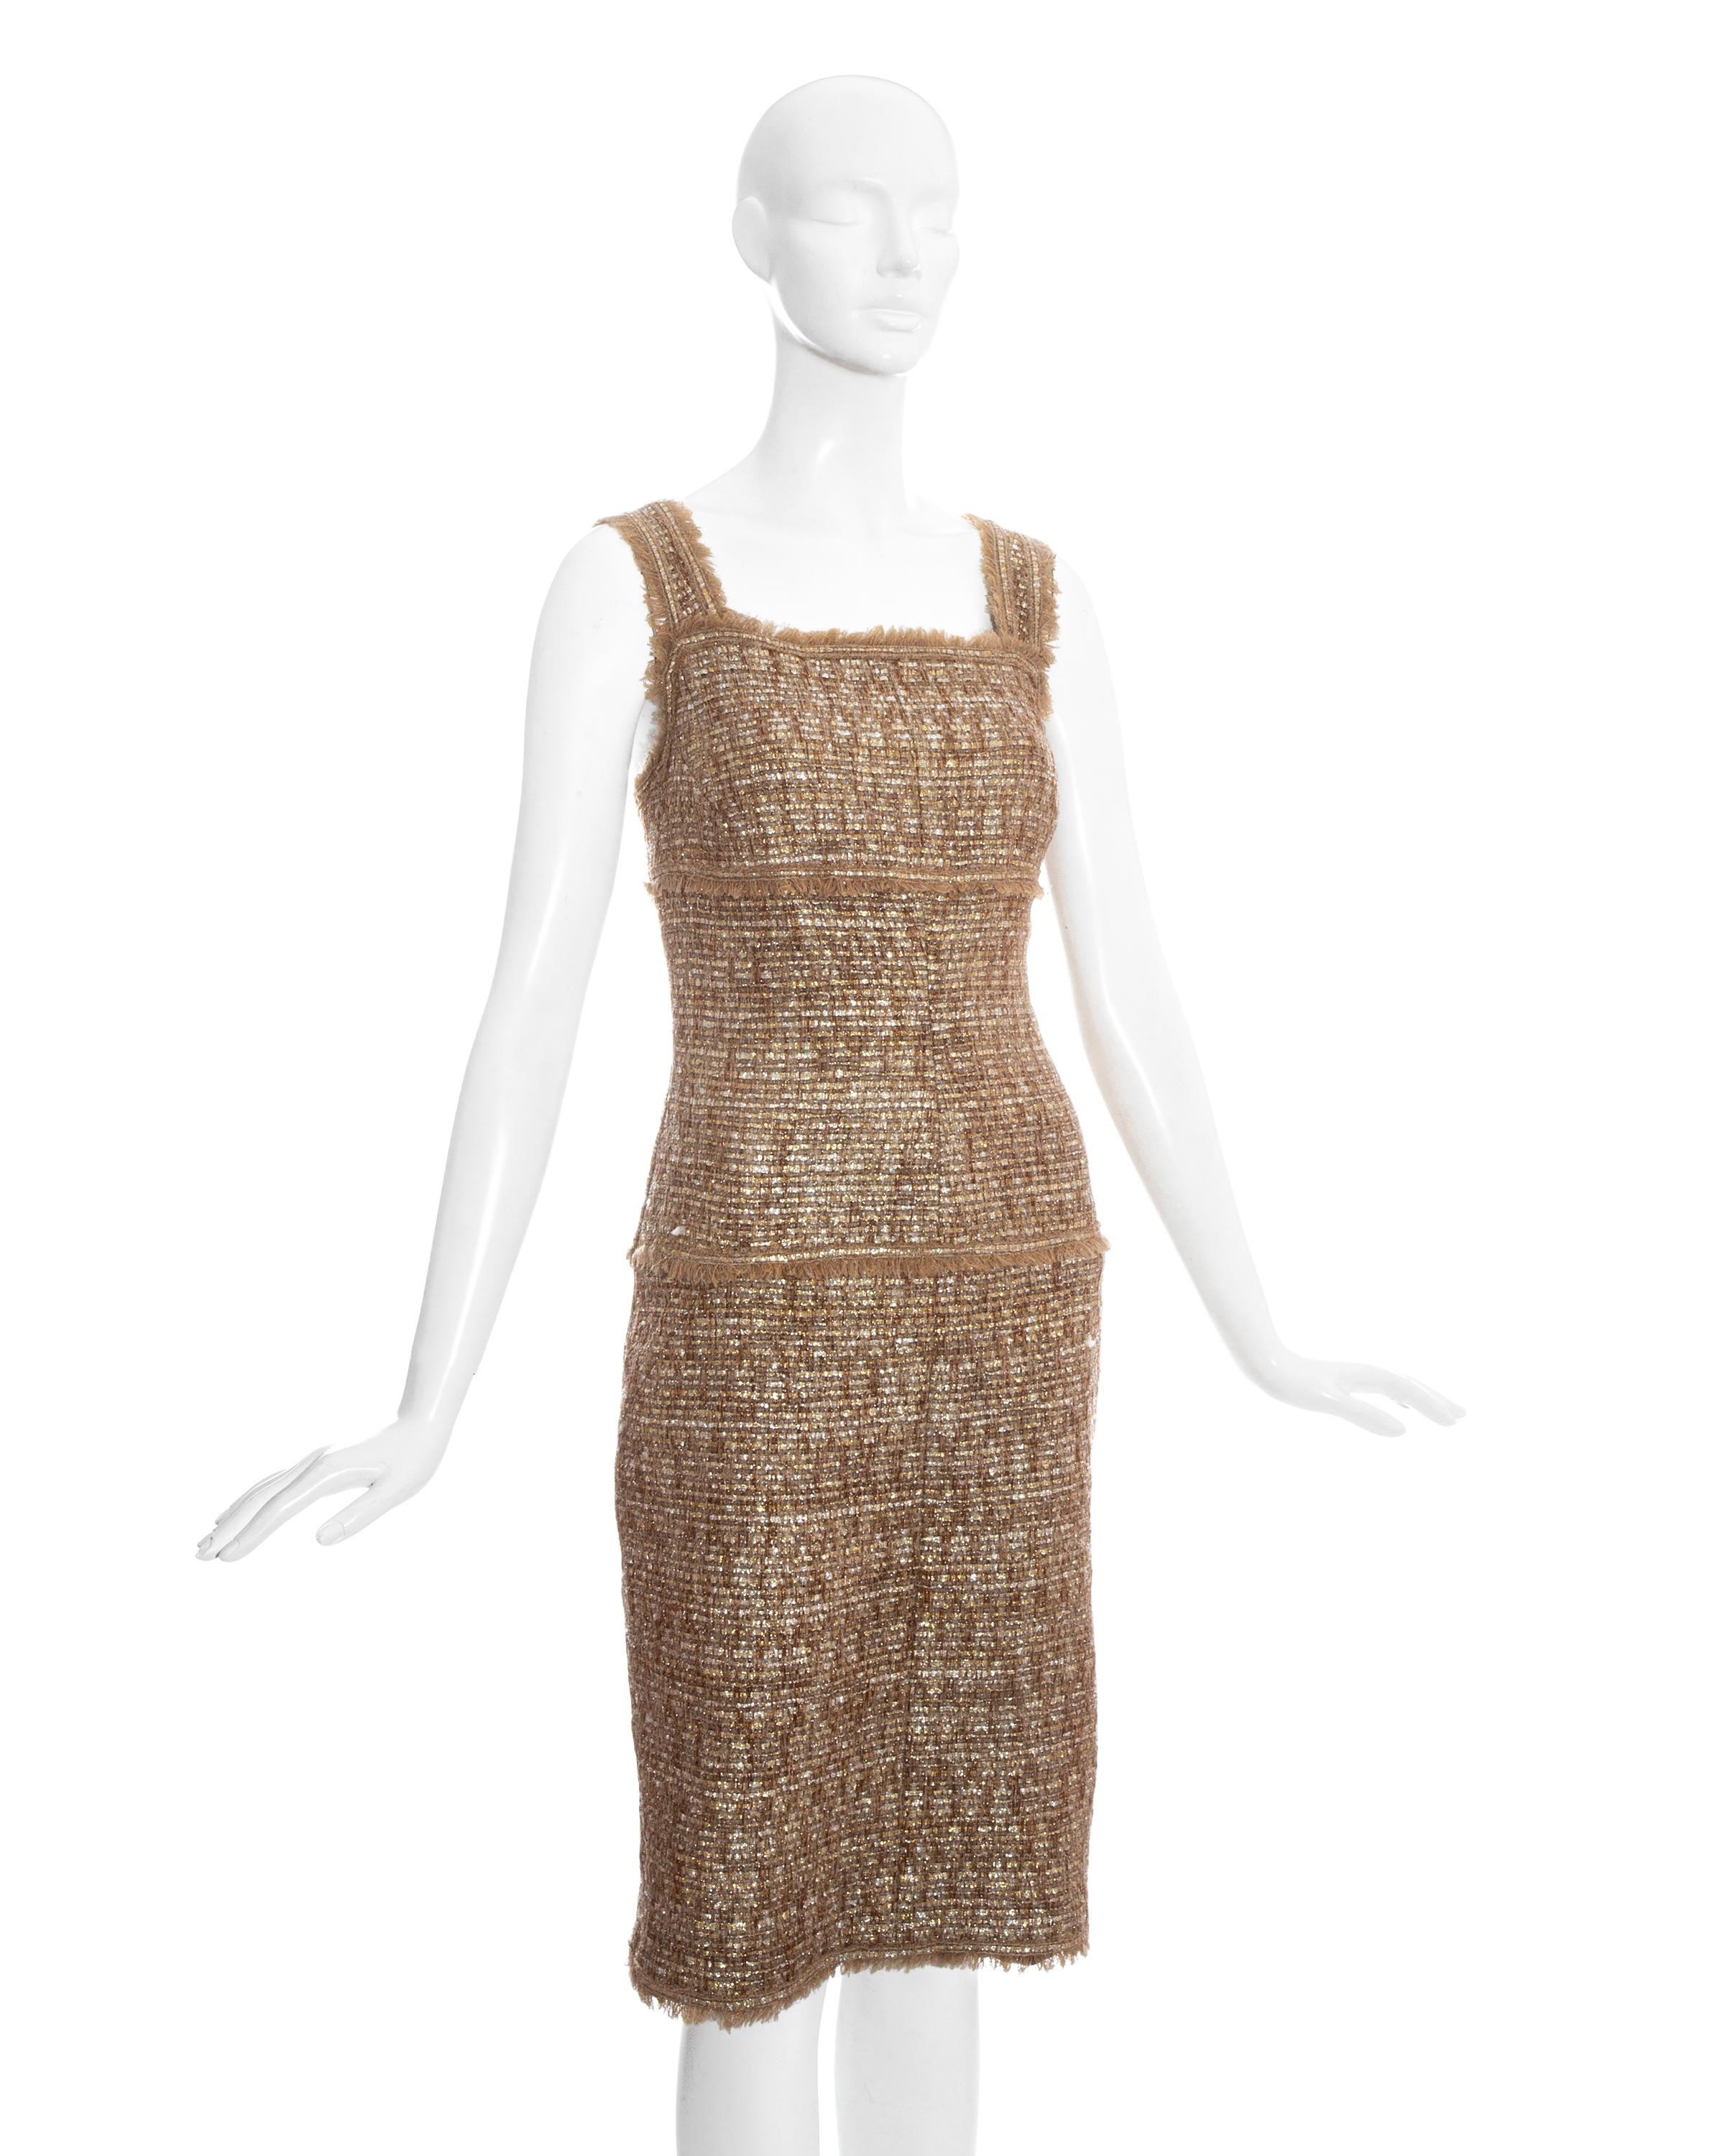 Metallic tweed dress by Chanel with frayed details